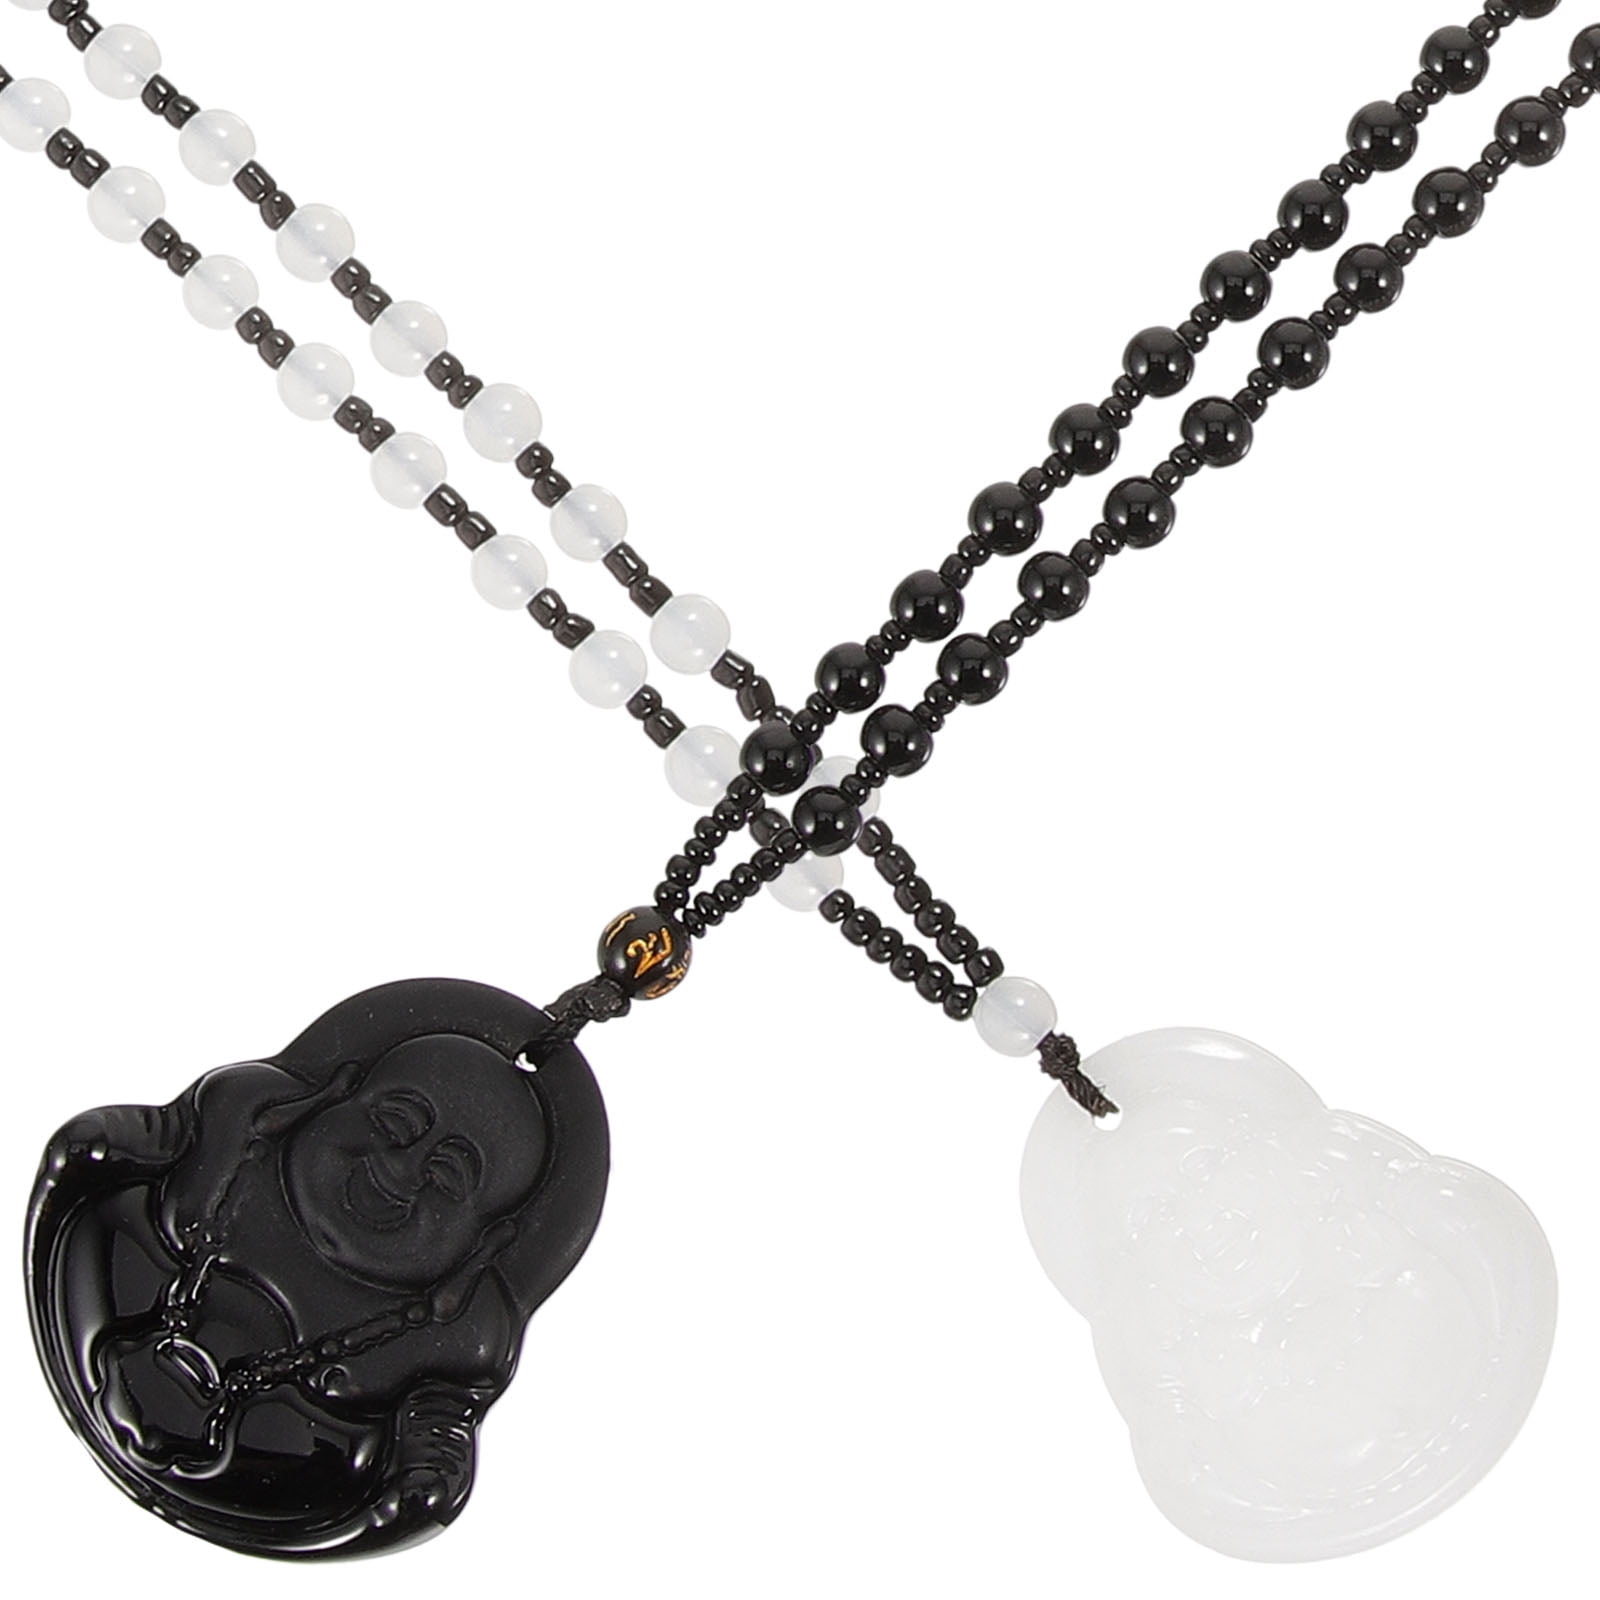 Buy Black Mala Necklace Buddha Necklace Japa Mala Mala Beads 108 Lava  Necklace Karma Necklace Anxiety Necklace Yoga Lover Gift Diffuser Necklace  Online in India - Etsy